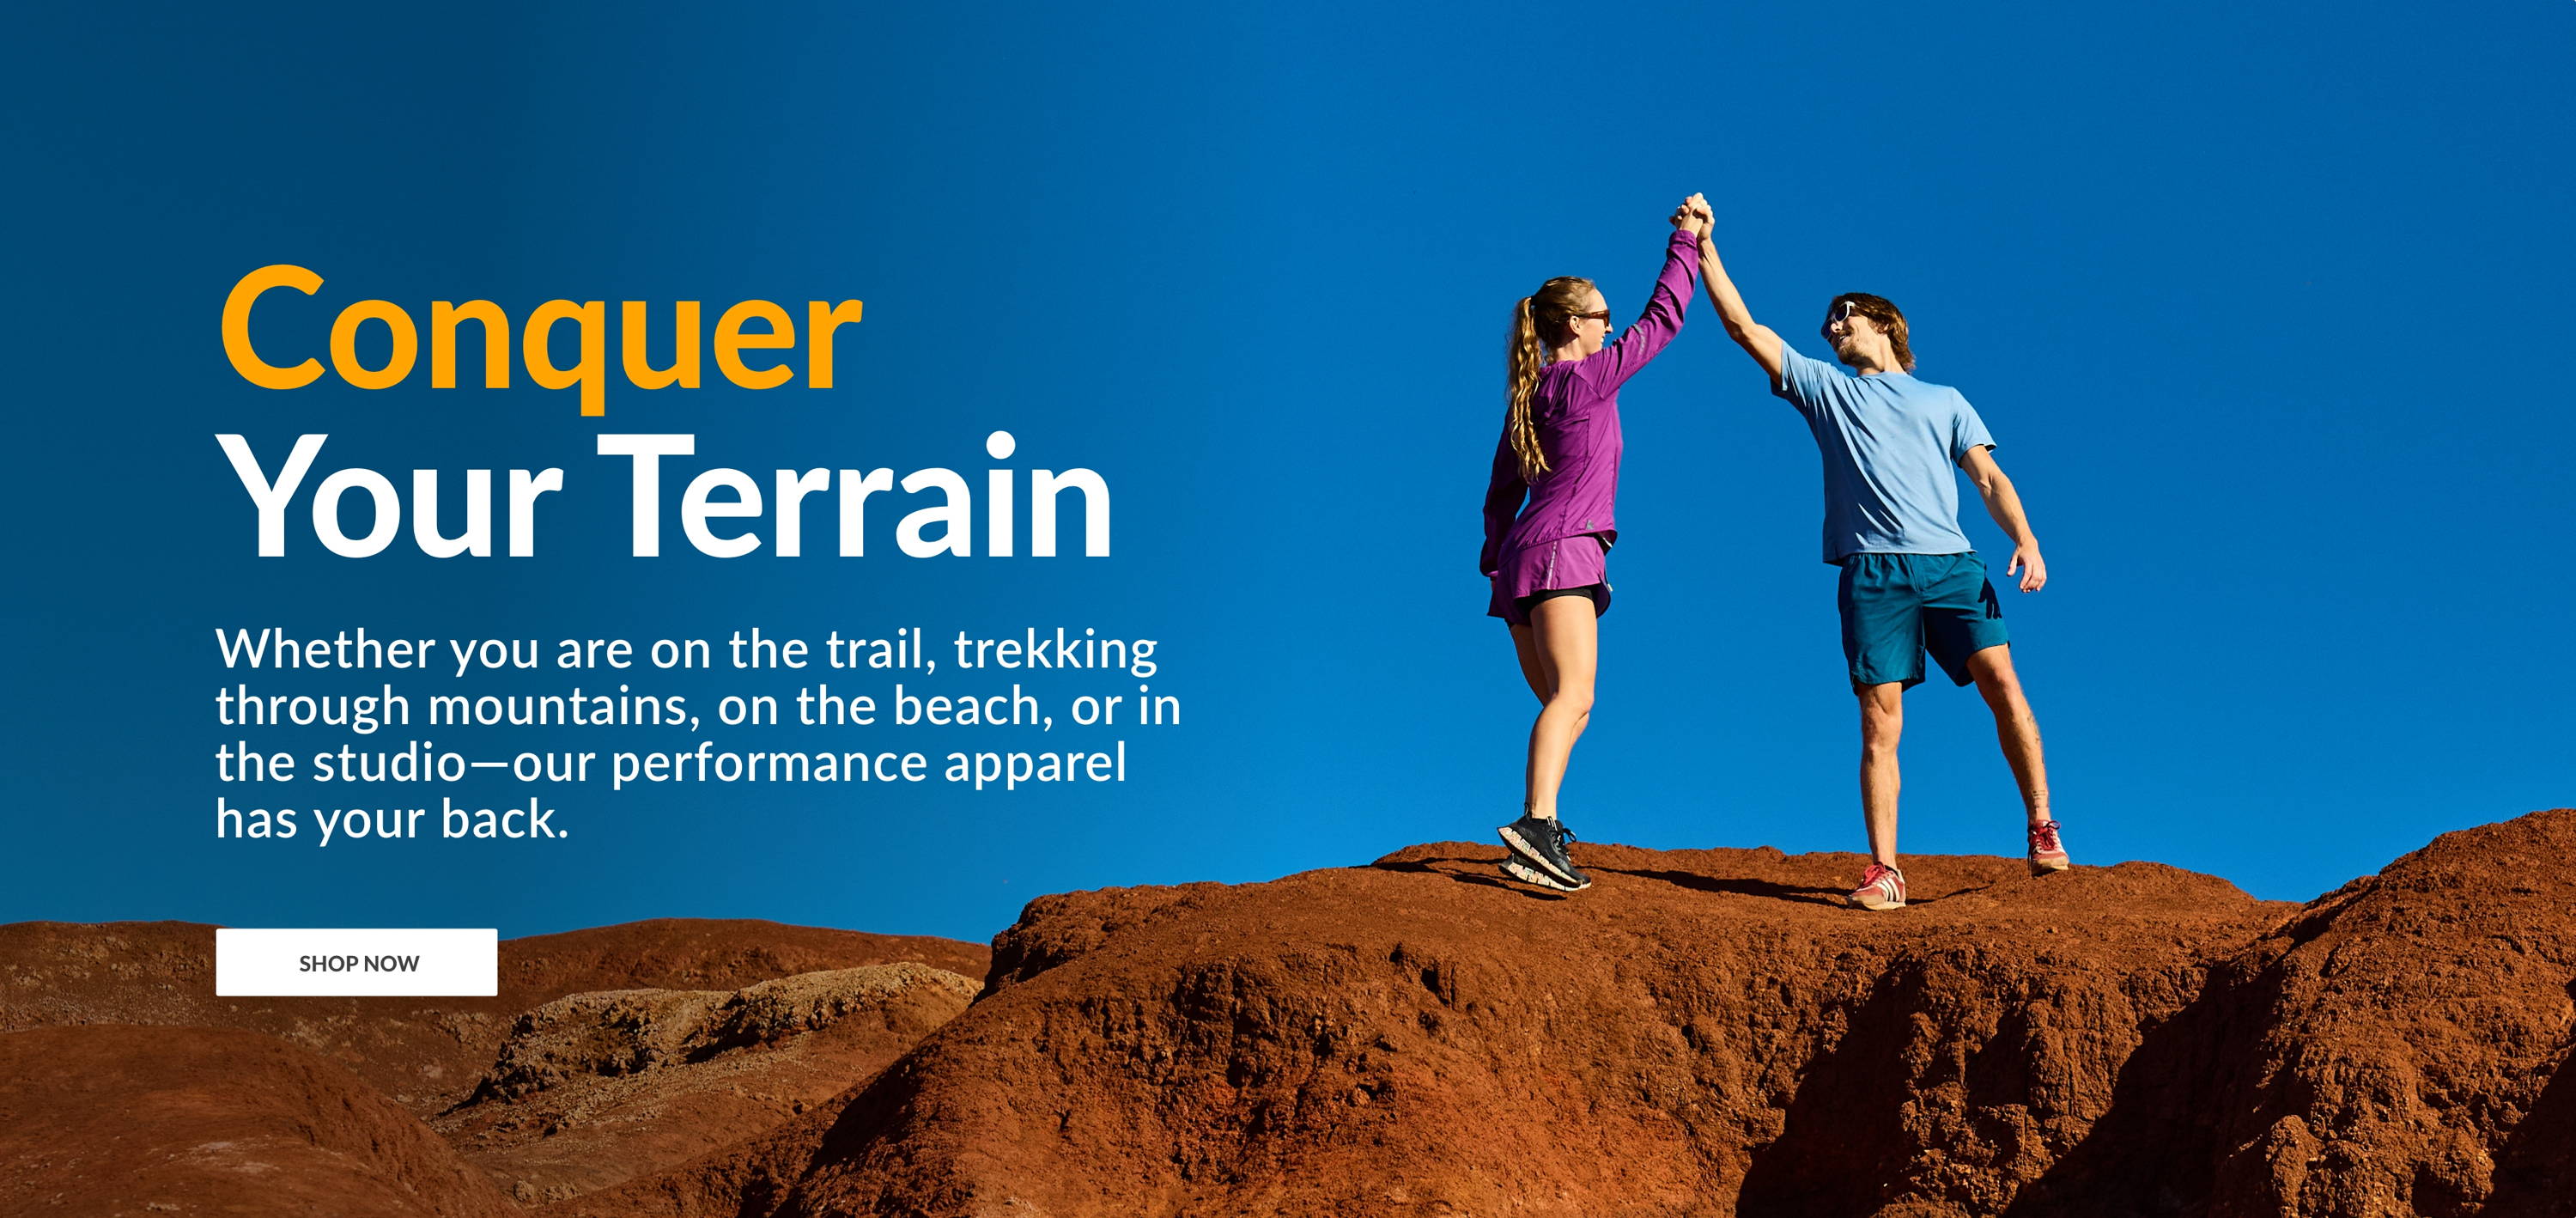 Conquer Your Terrain. Whether you are on the trail, trekking through mountains, on the beach, or in the studio - our performance apparel has your back. SHOP NOW